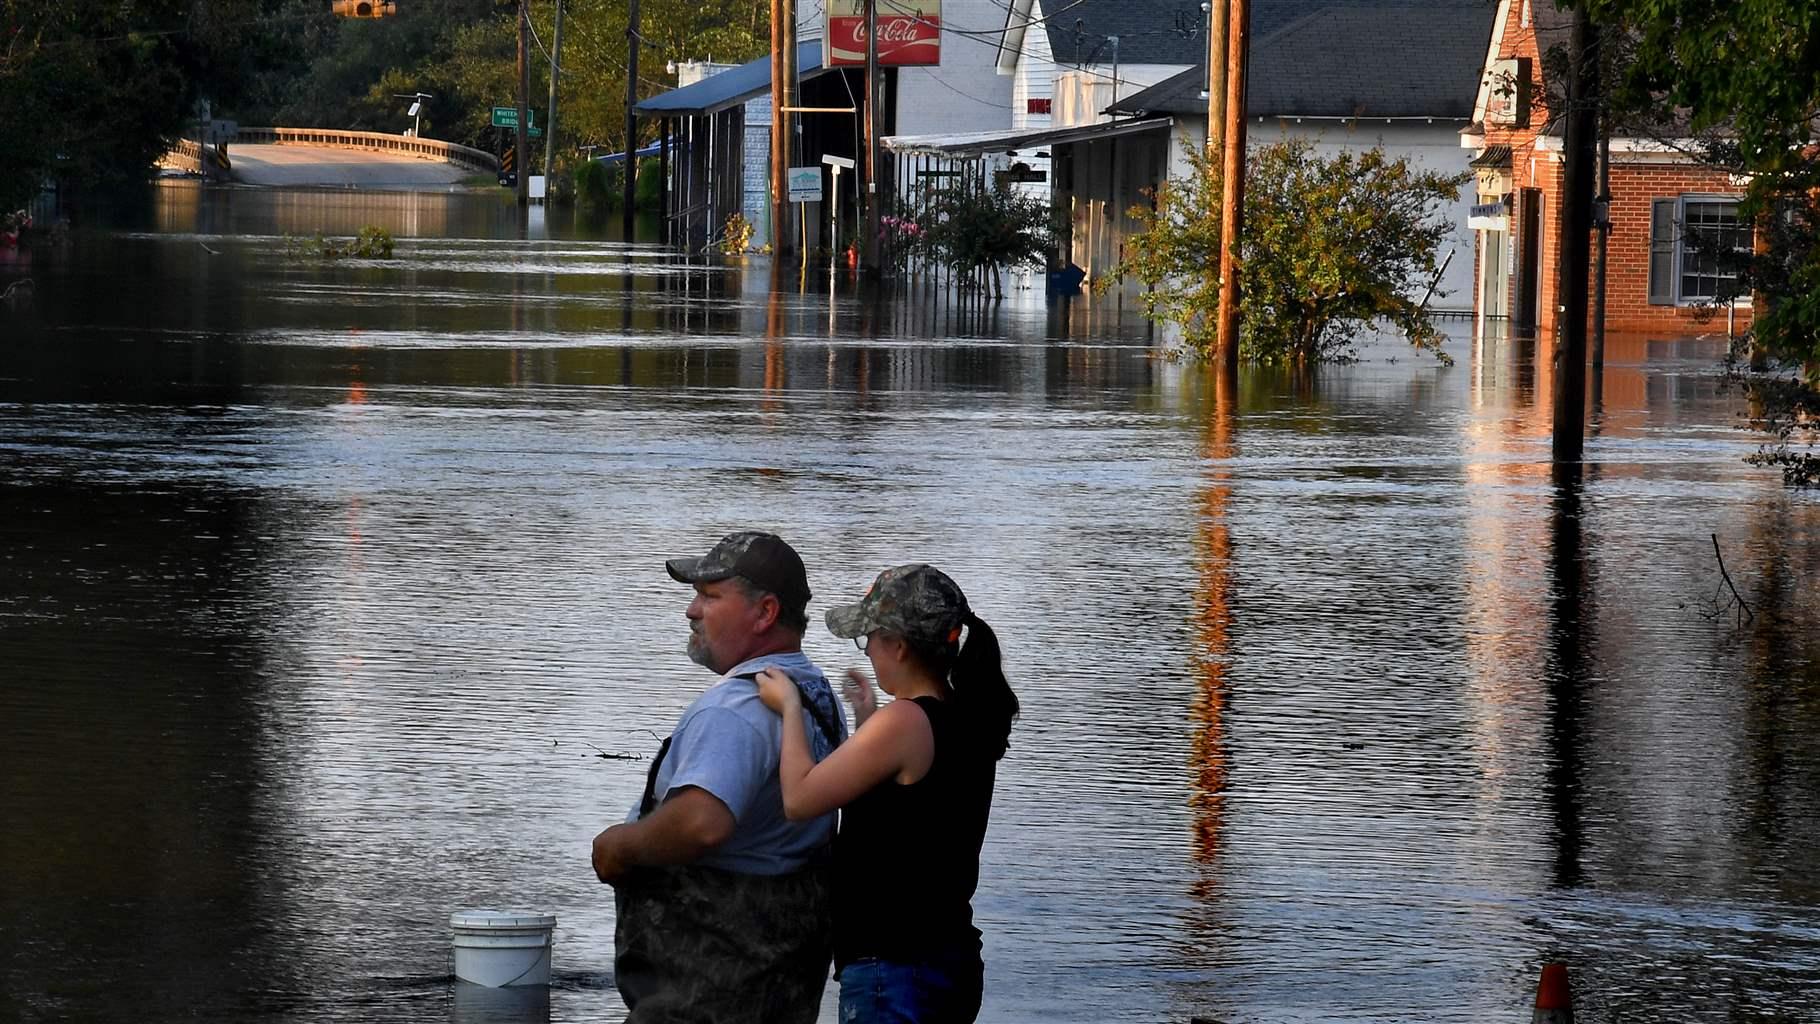 A father and daughter standing in a flooded street.